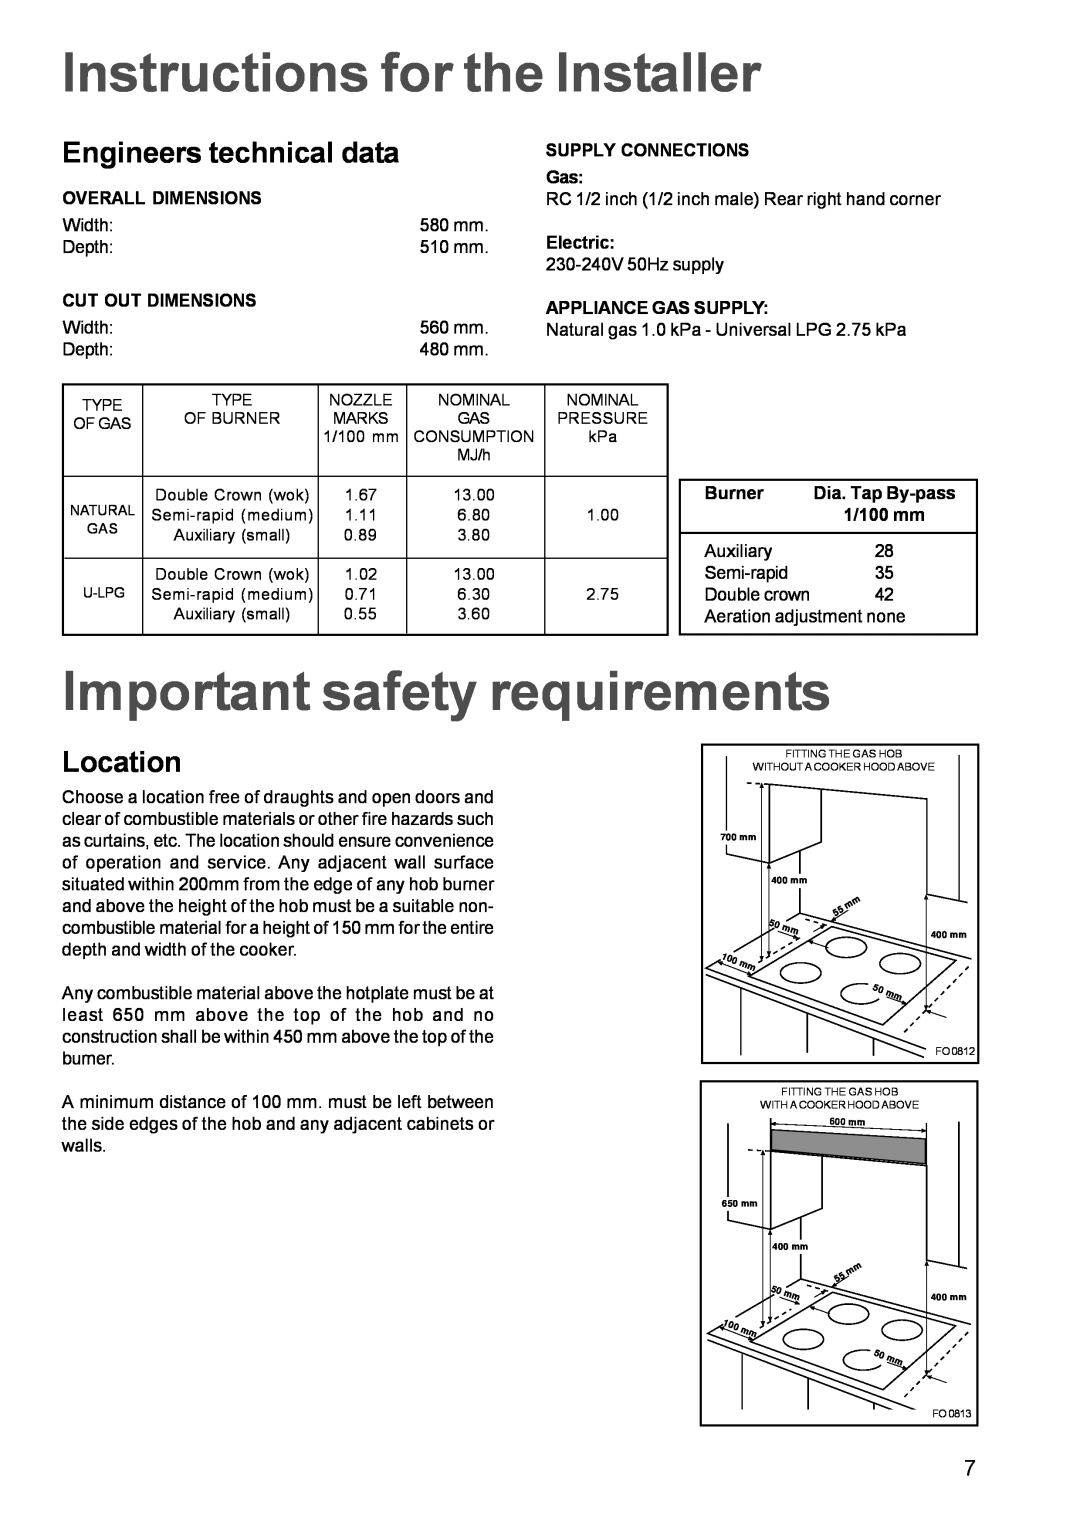 Zanussi ZGF 681 manual Instructions for the Installer, Important safety requirements, Engineers technical data, Location 